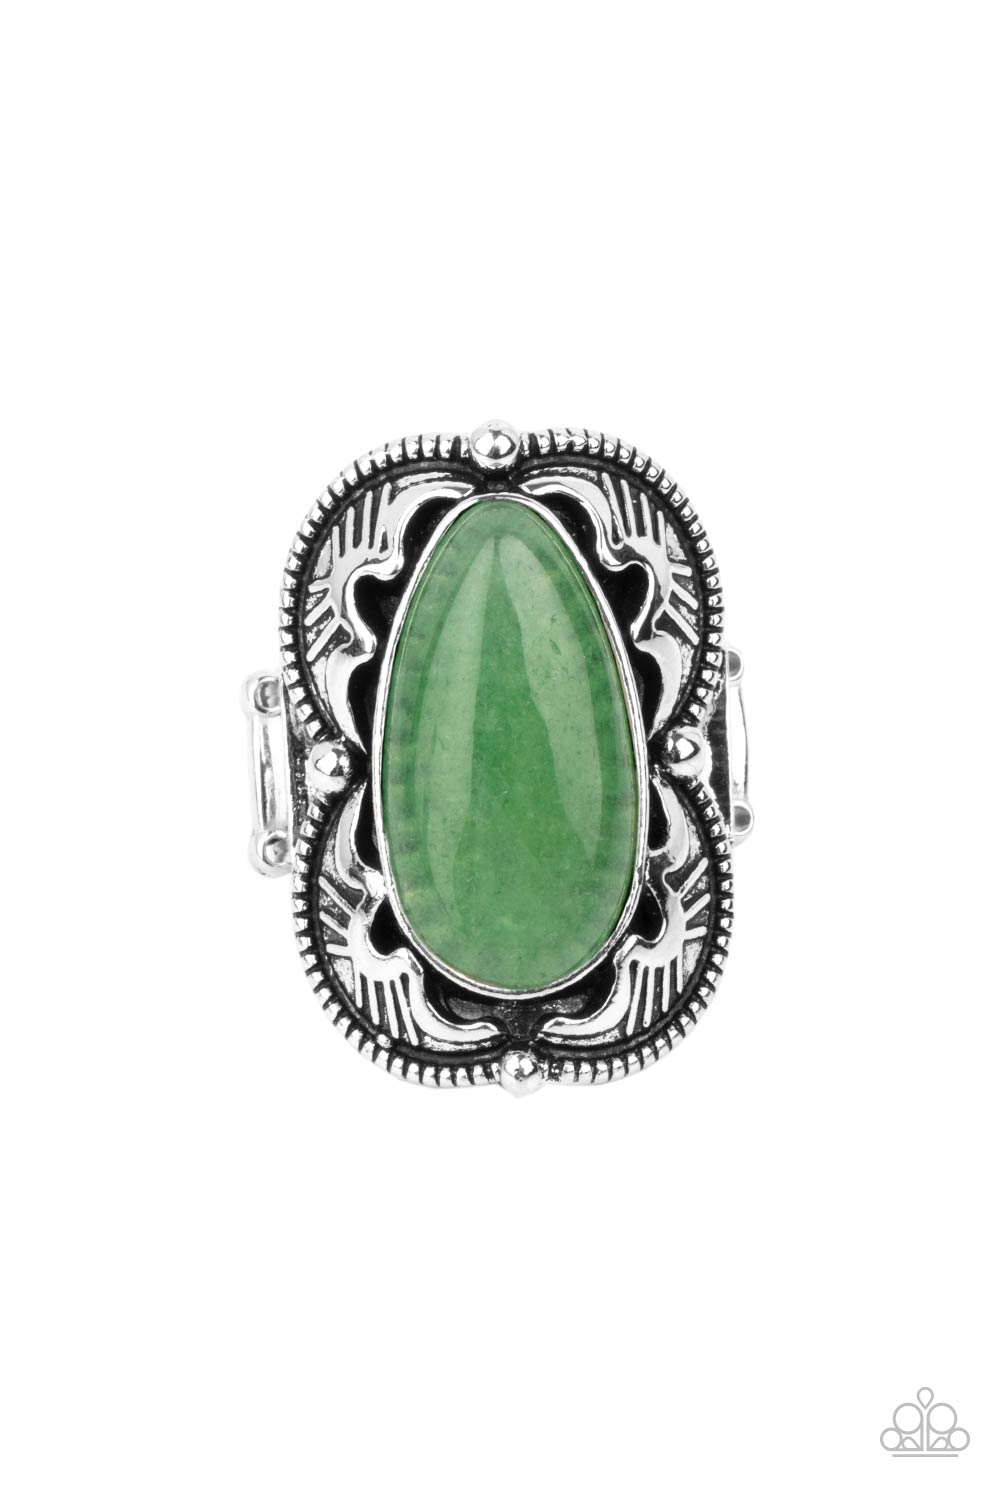 Mystical Mambo Green Ring - Paparazzi Accessories.  An oversized jade teardrop is pressed into the center of a decoratively scalloped silver frame, creating an enchanting centerpiece atop the finger. Features a stretchy band for a flexible fit.  ﻿﻿﻿All Paparazzi Accessories are lead free and nickel free!  Sold as one individual ring.